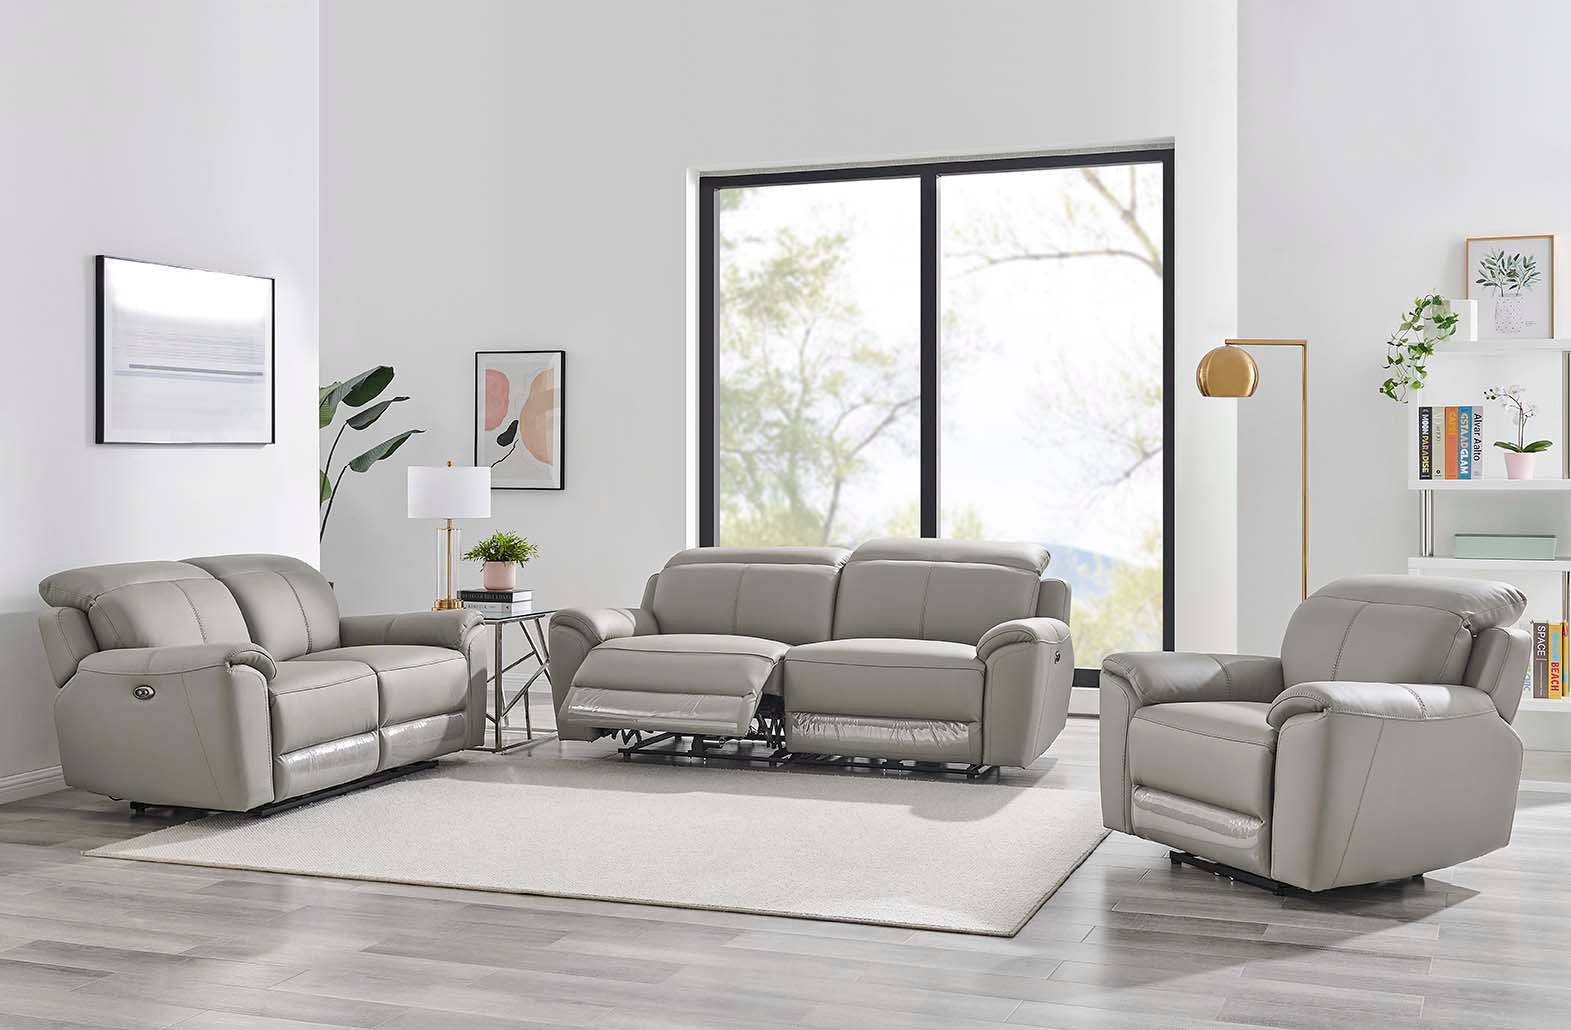 Madrid 3 Seater Electric Recliner - Charcoal